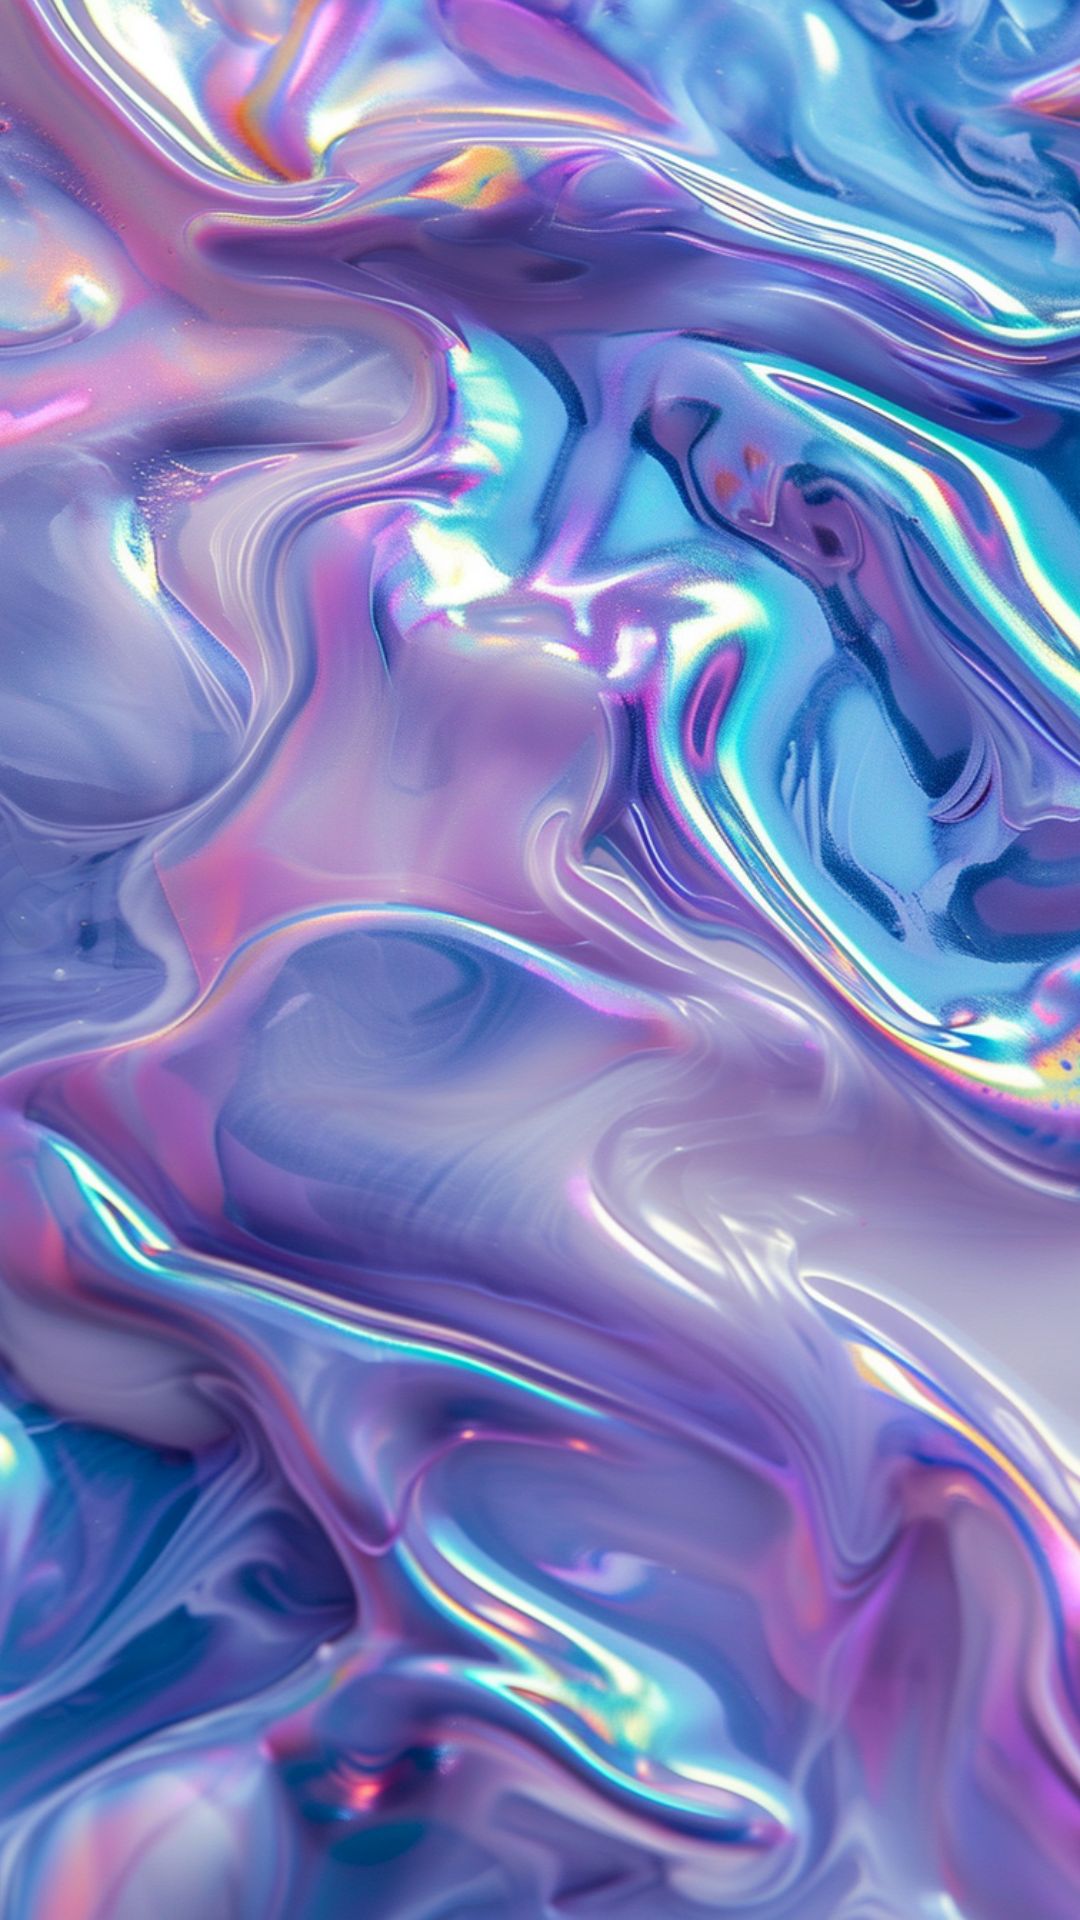 21 Iridescent iPhone Wallpapers That Turn Your Screen into Eye Candy!